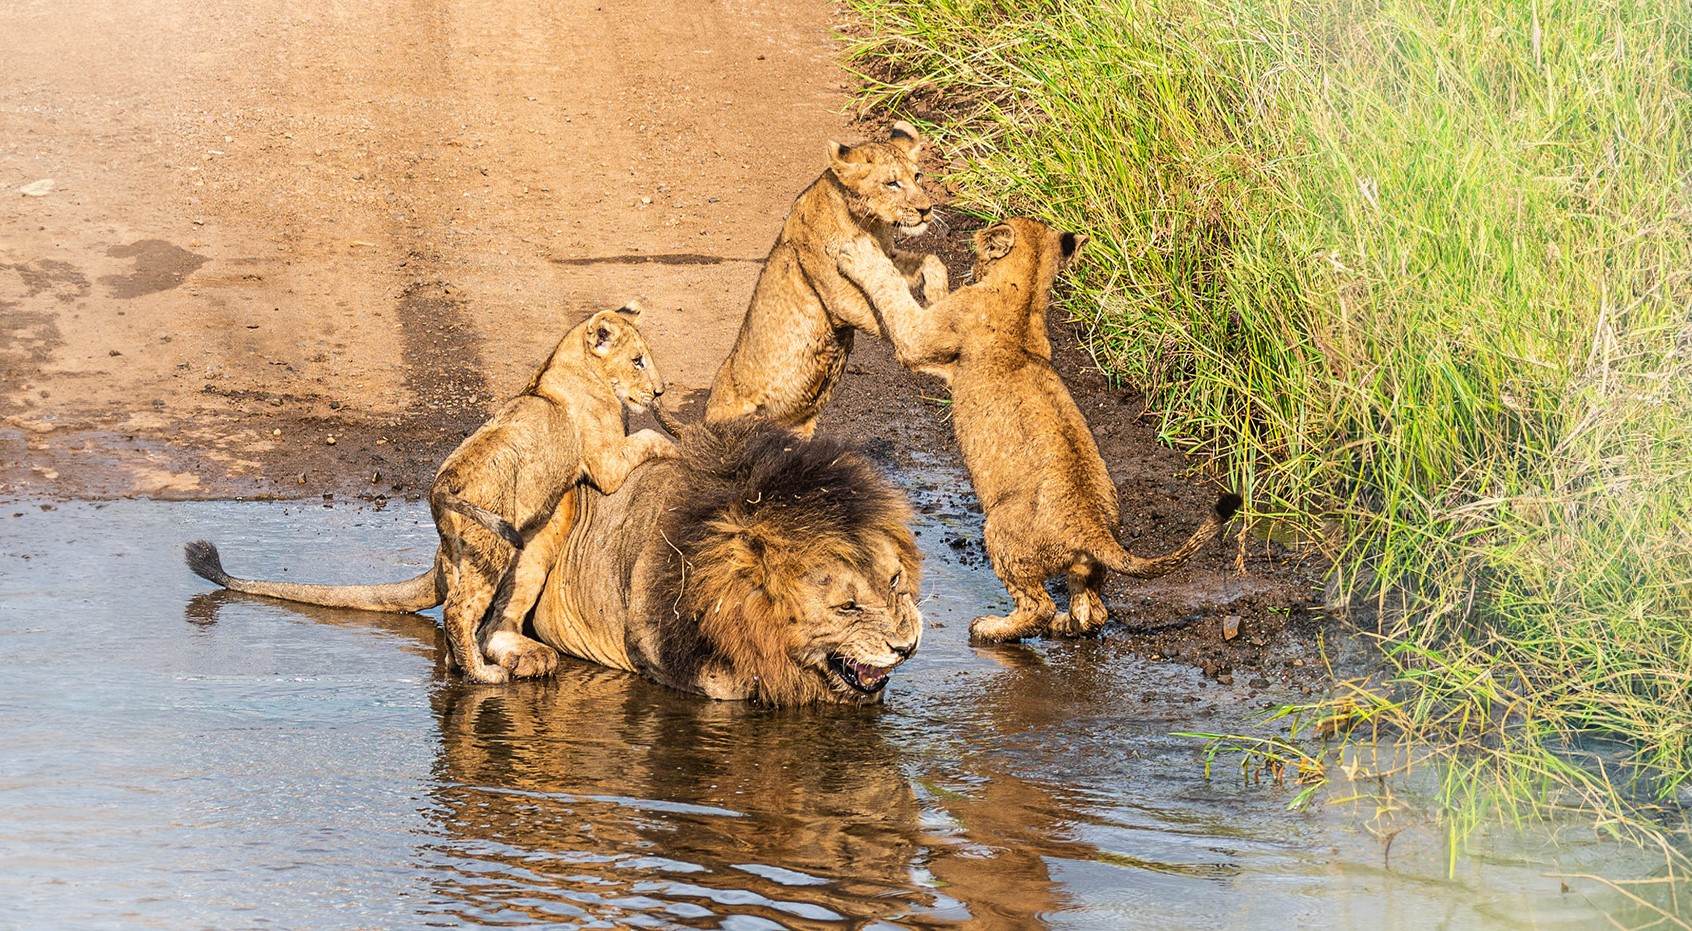 Lion Dad’s Hilarious Struggle with Naughty Cubs